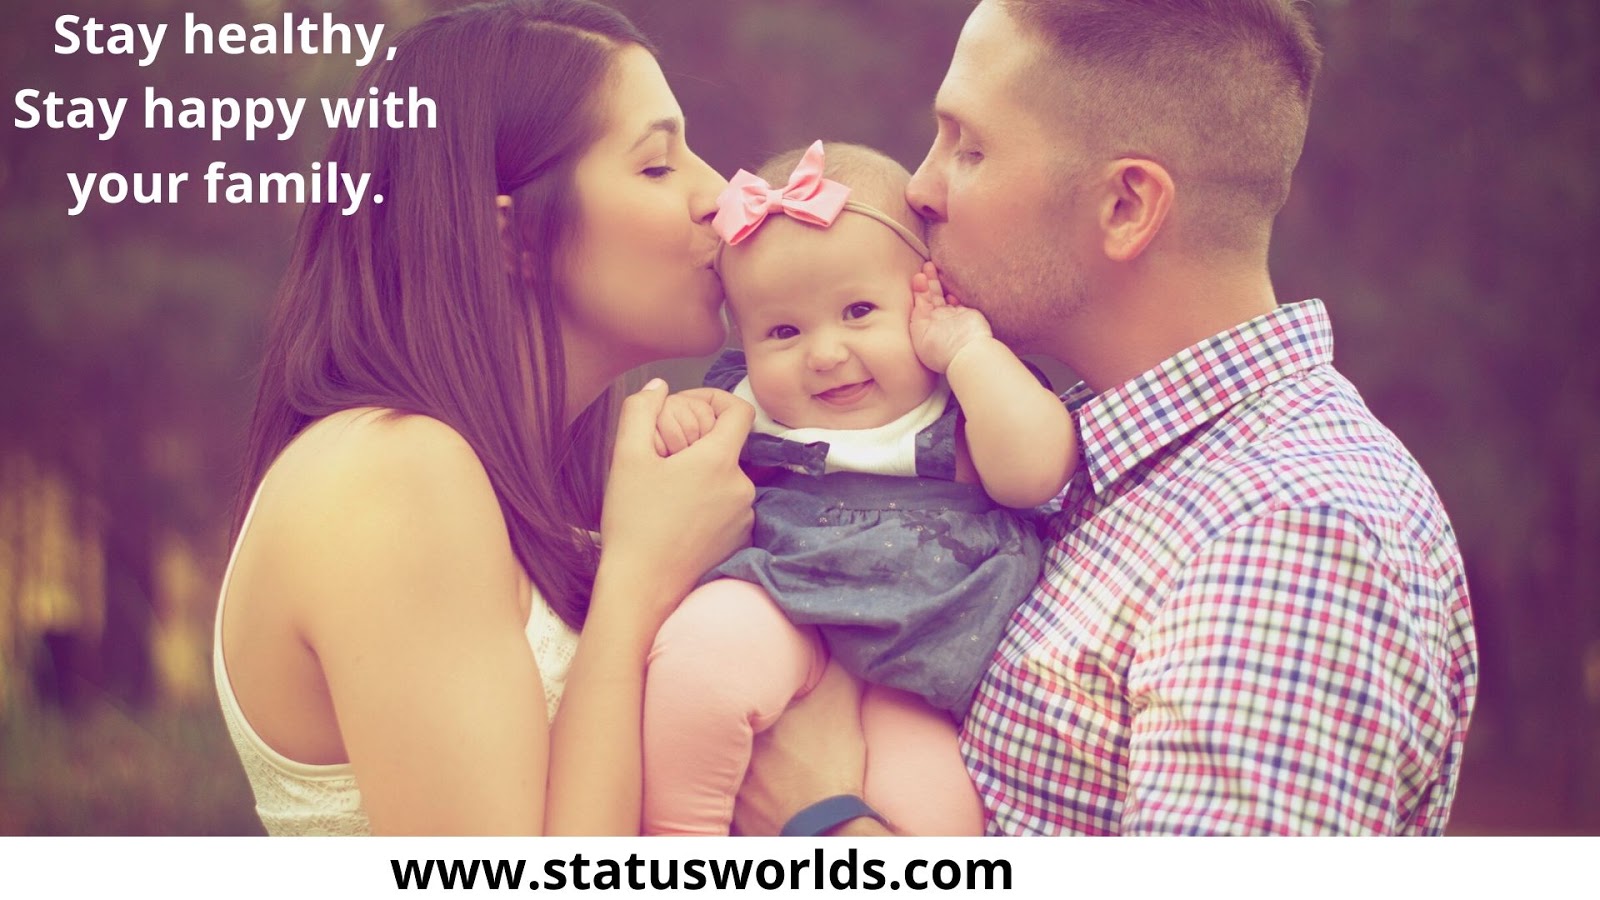 301+ Best Family Status & Captions For A Family Lover - Status World